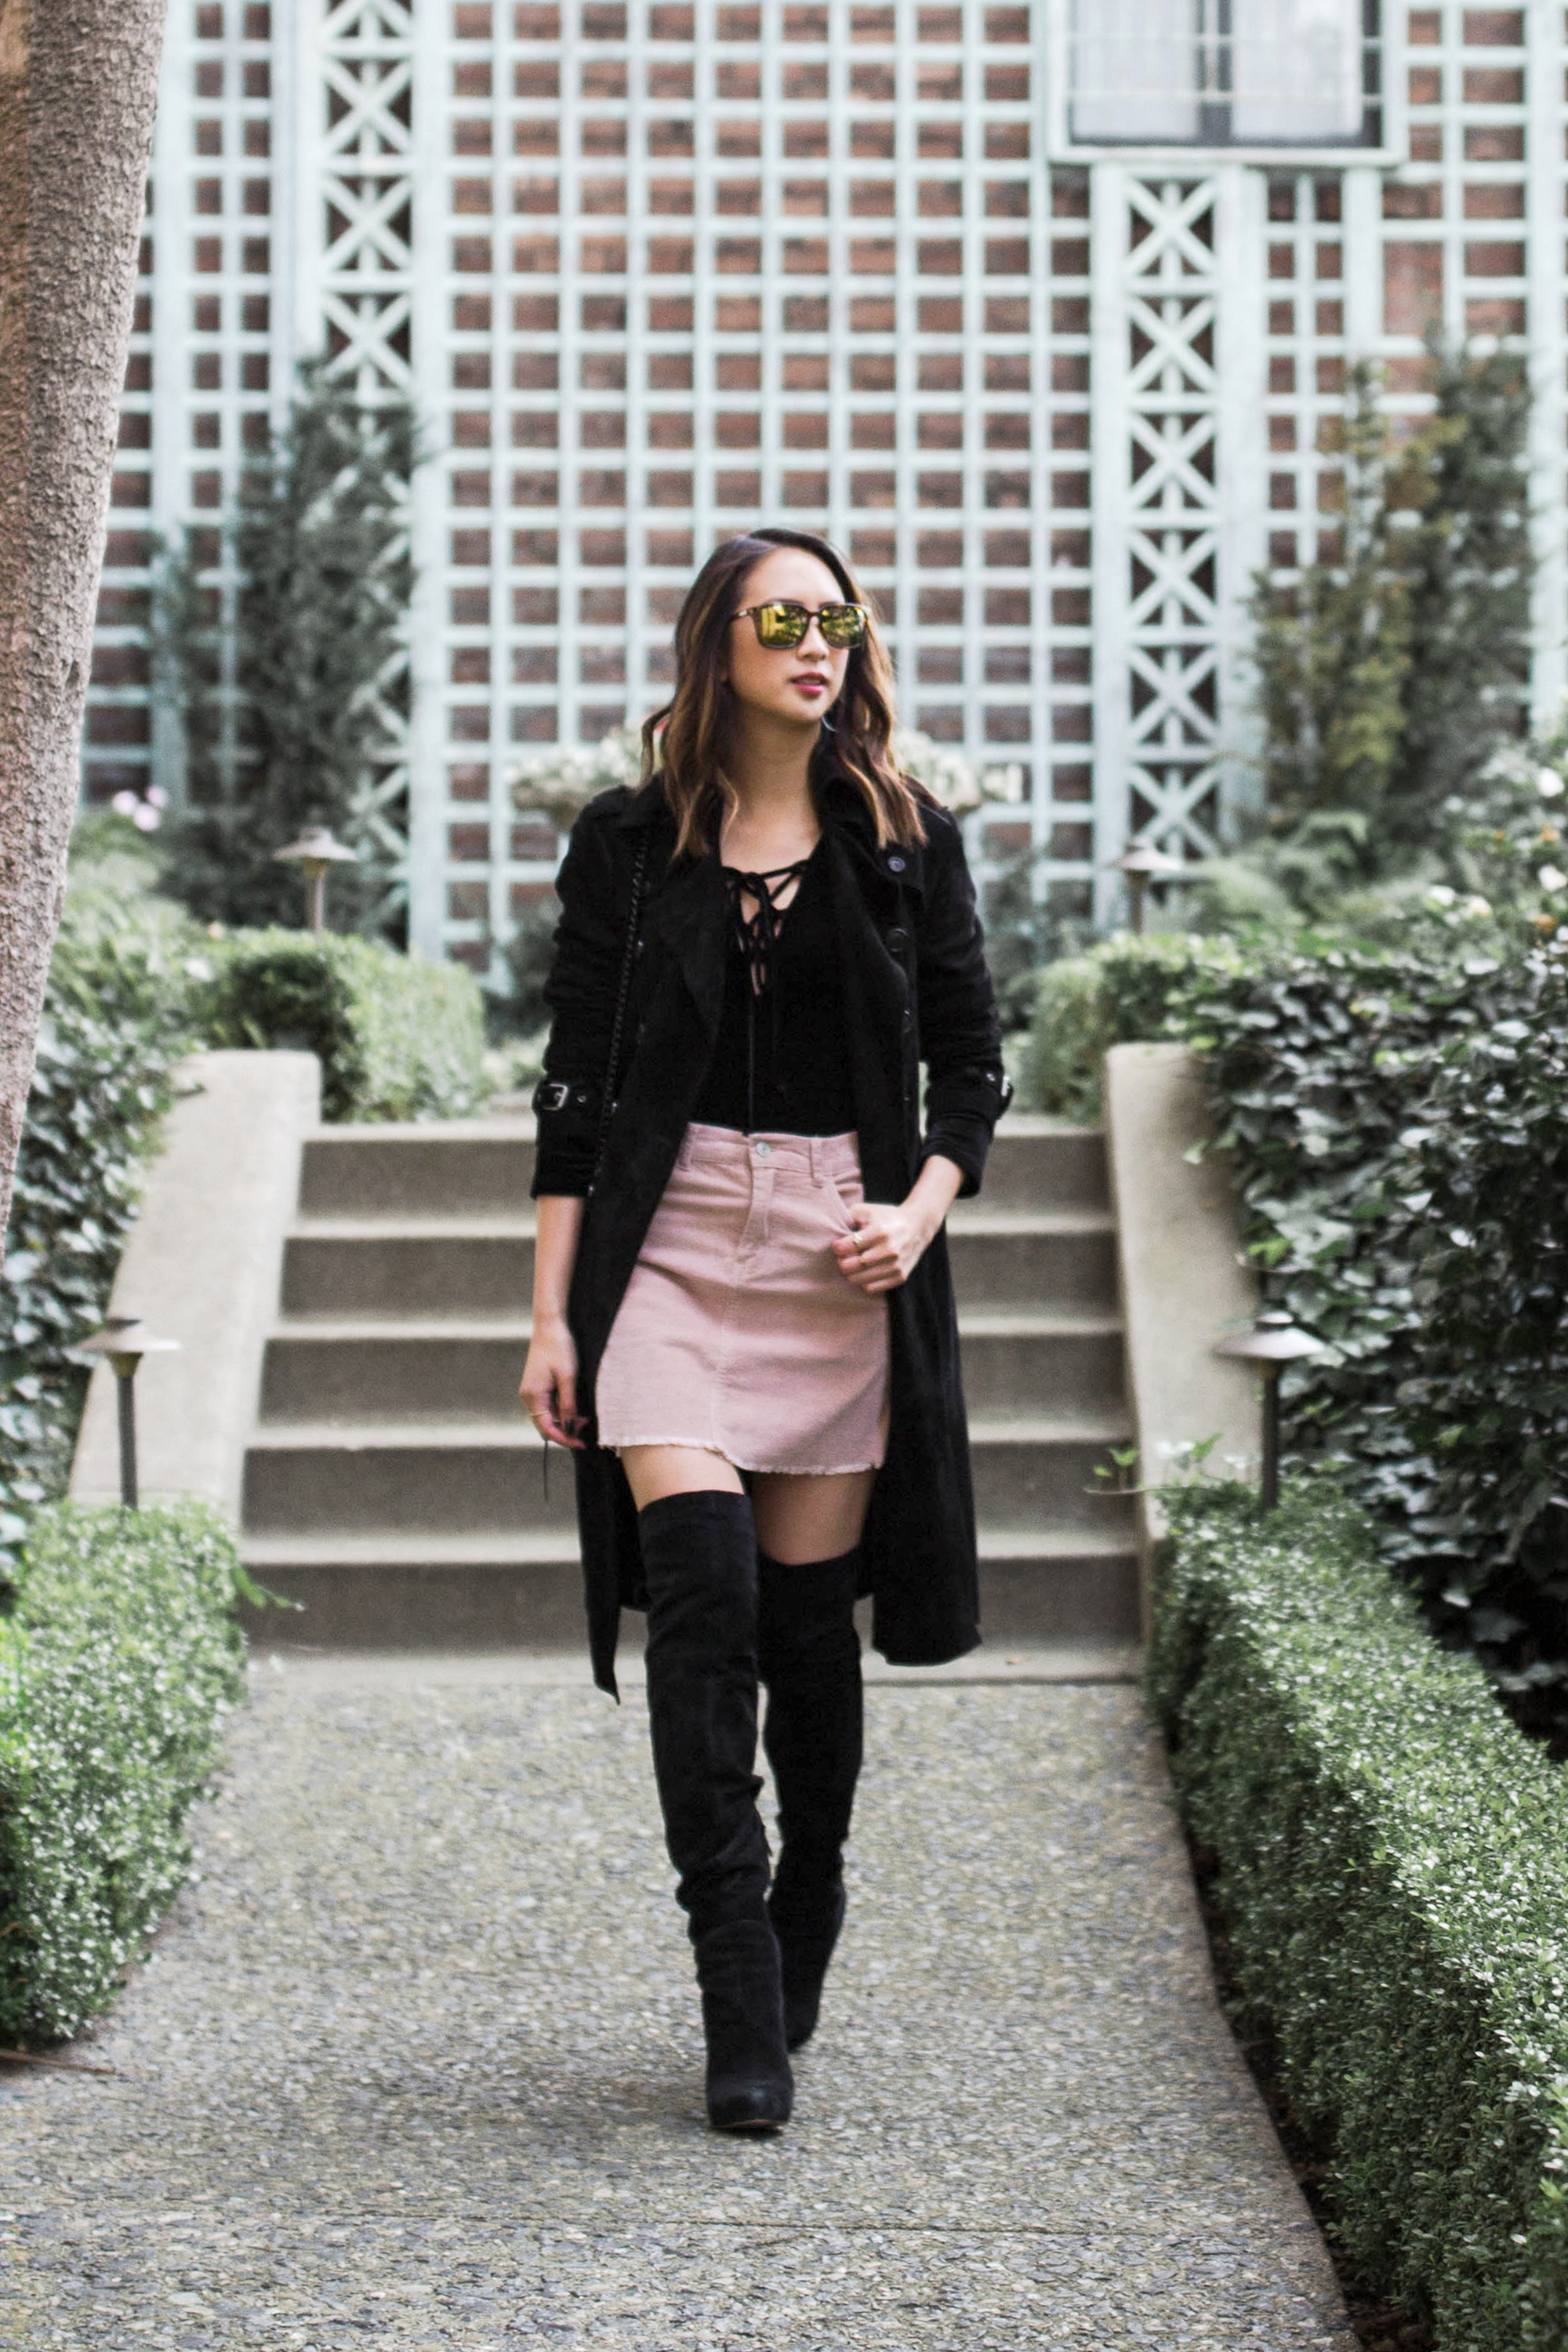 Rebecca Minkoff Amis suede trench coat, velvet lace up bodysuit, pink corduroy skirt, over the knee boots, rebecca minkoff mini mac quilted